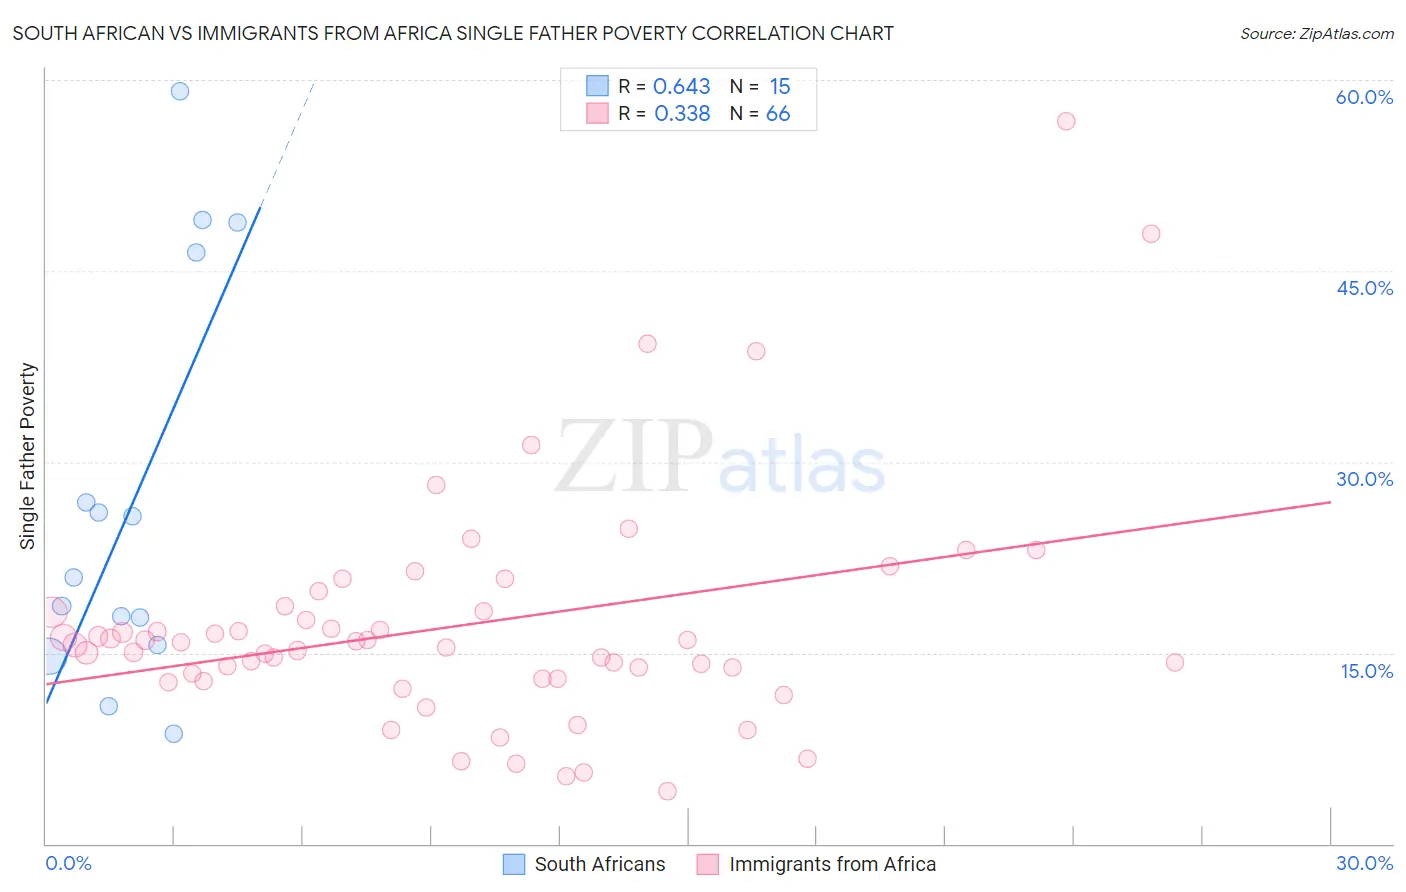 South African vs Immigrants from Africa Single Father Poverty